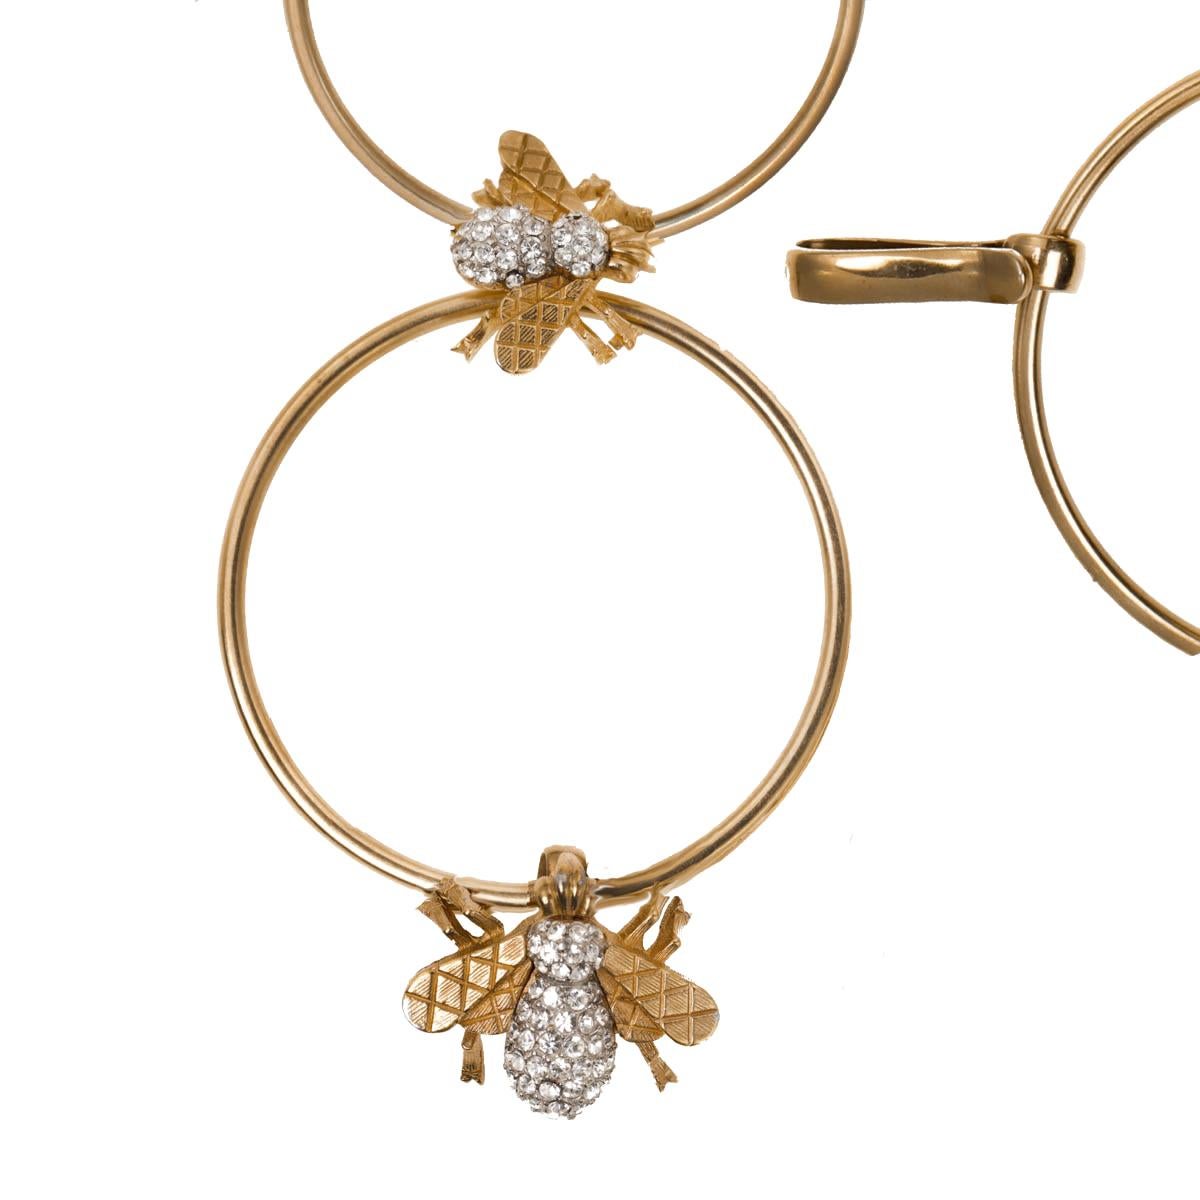 Large polished gold round hoops, adorned with CINER's signature heritage bee, creates a conversationally chic chain belt. With beautifully detailed quilted bee wings and Swarovski crystal rhinestone body, this belt is the perfect accessory to